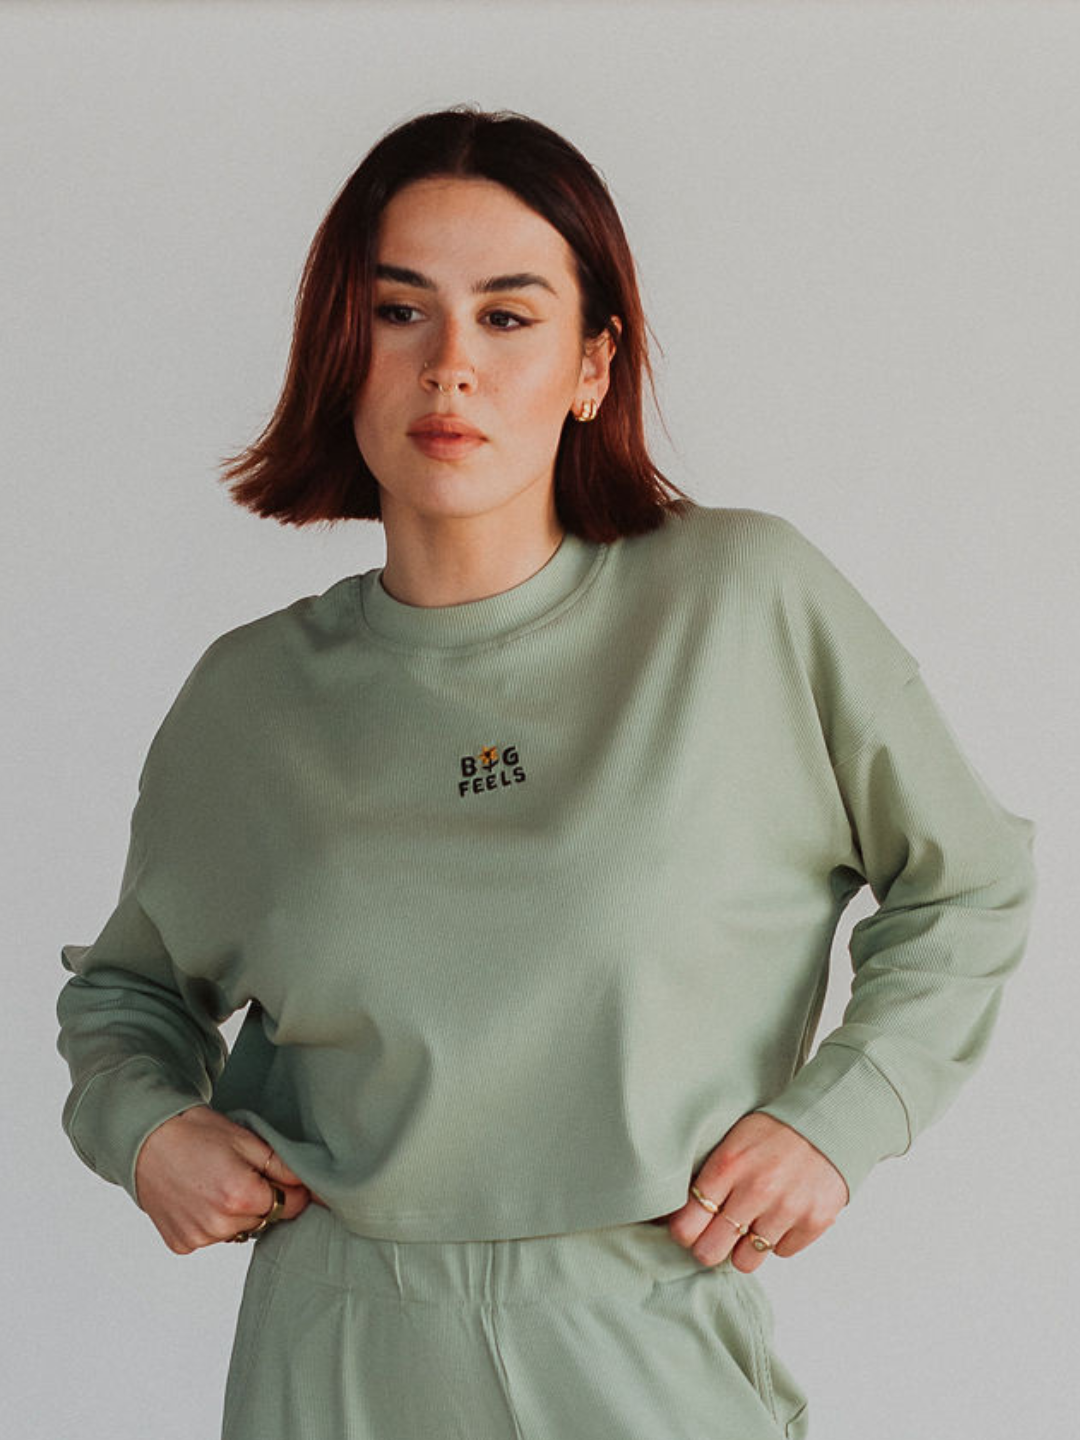 Big Feels Ribbed Long Sleeve - Octopied Mind